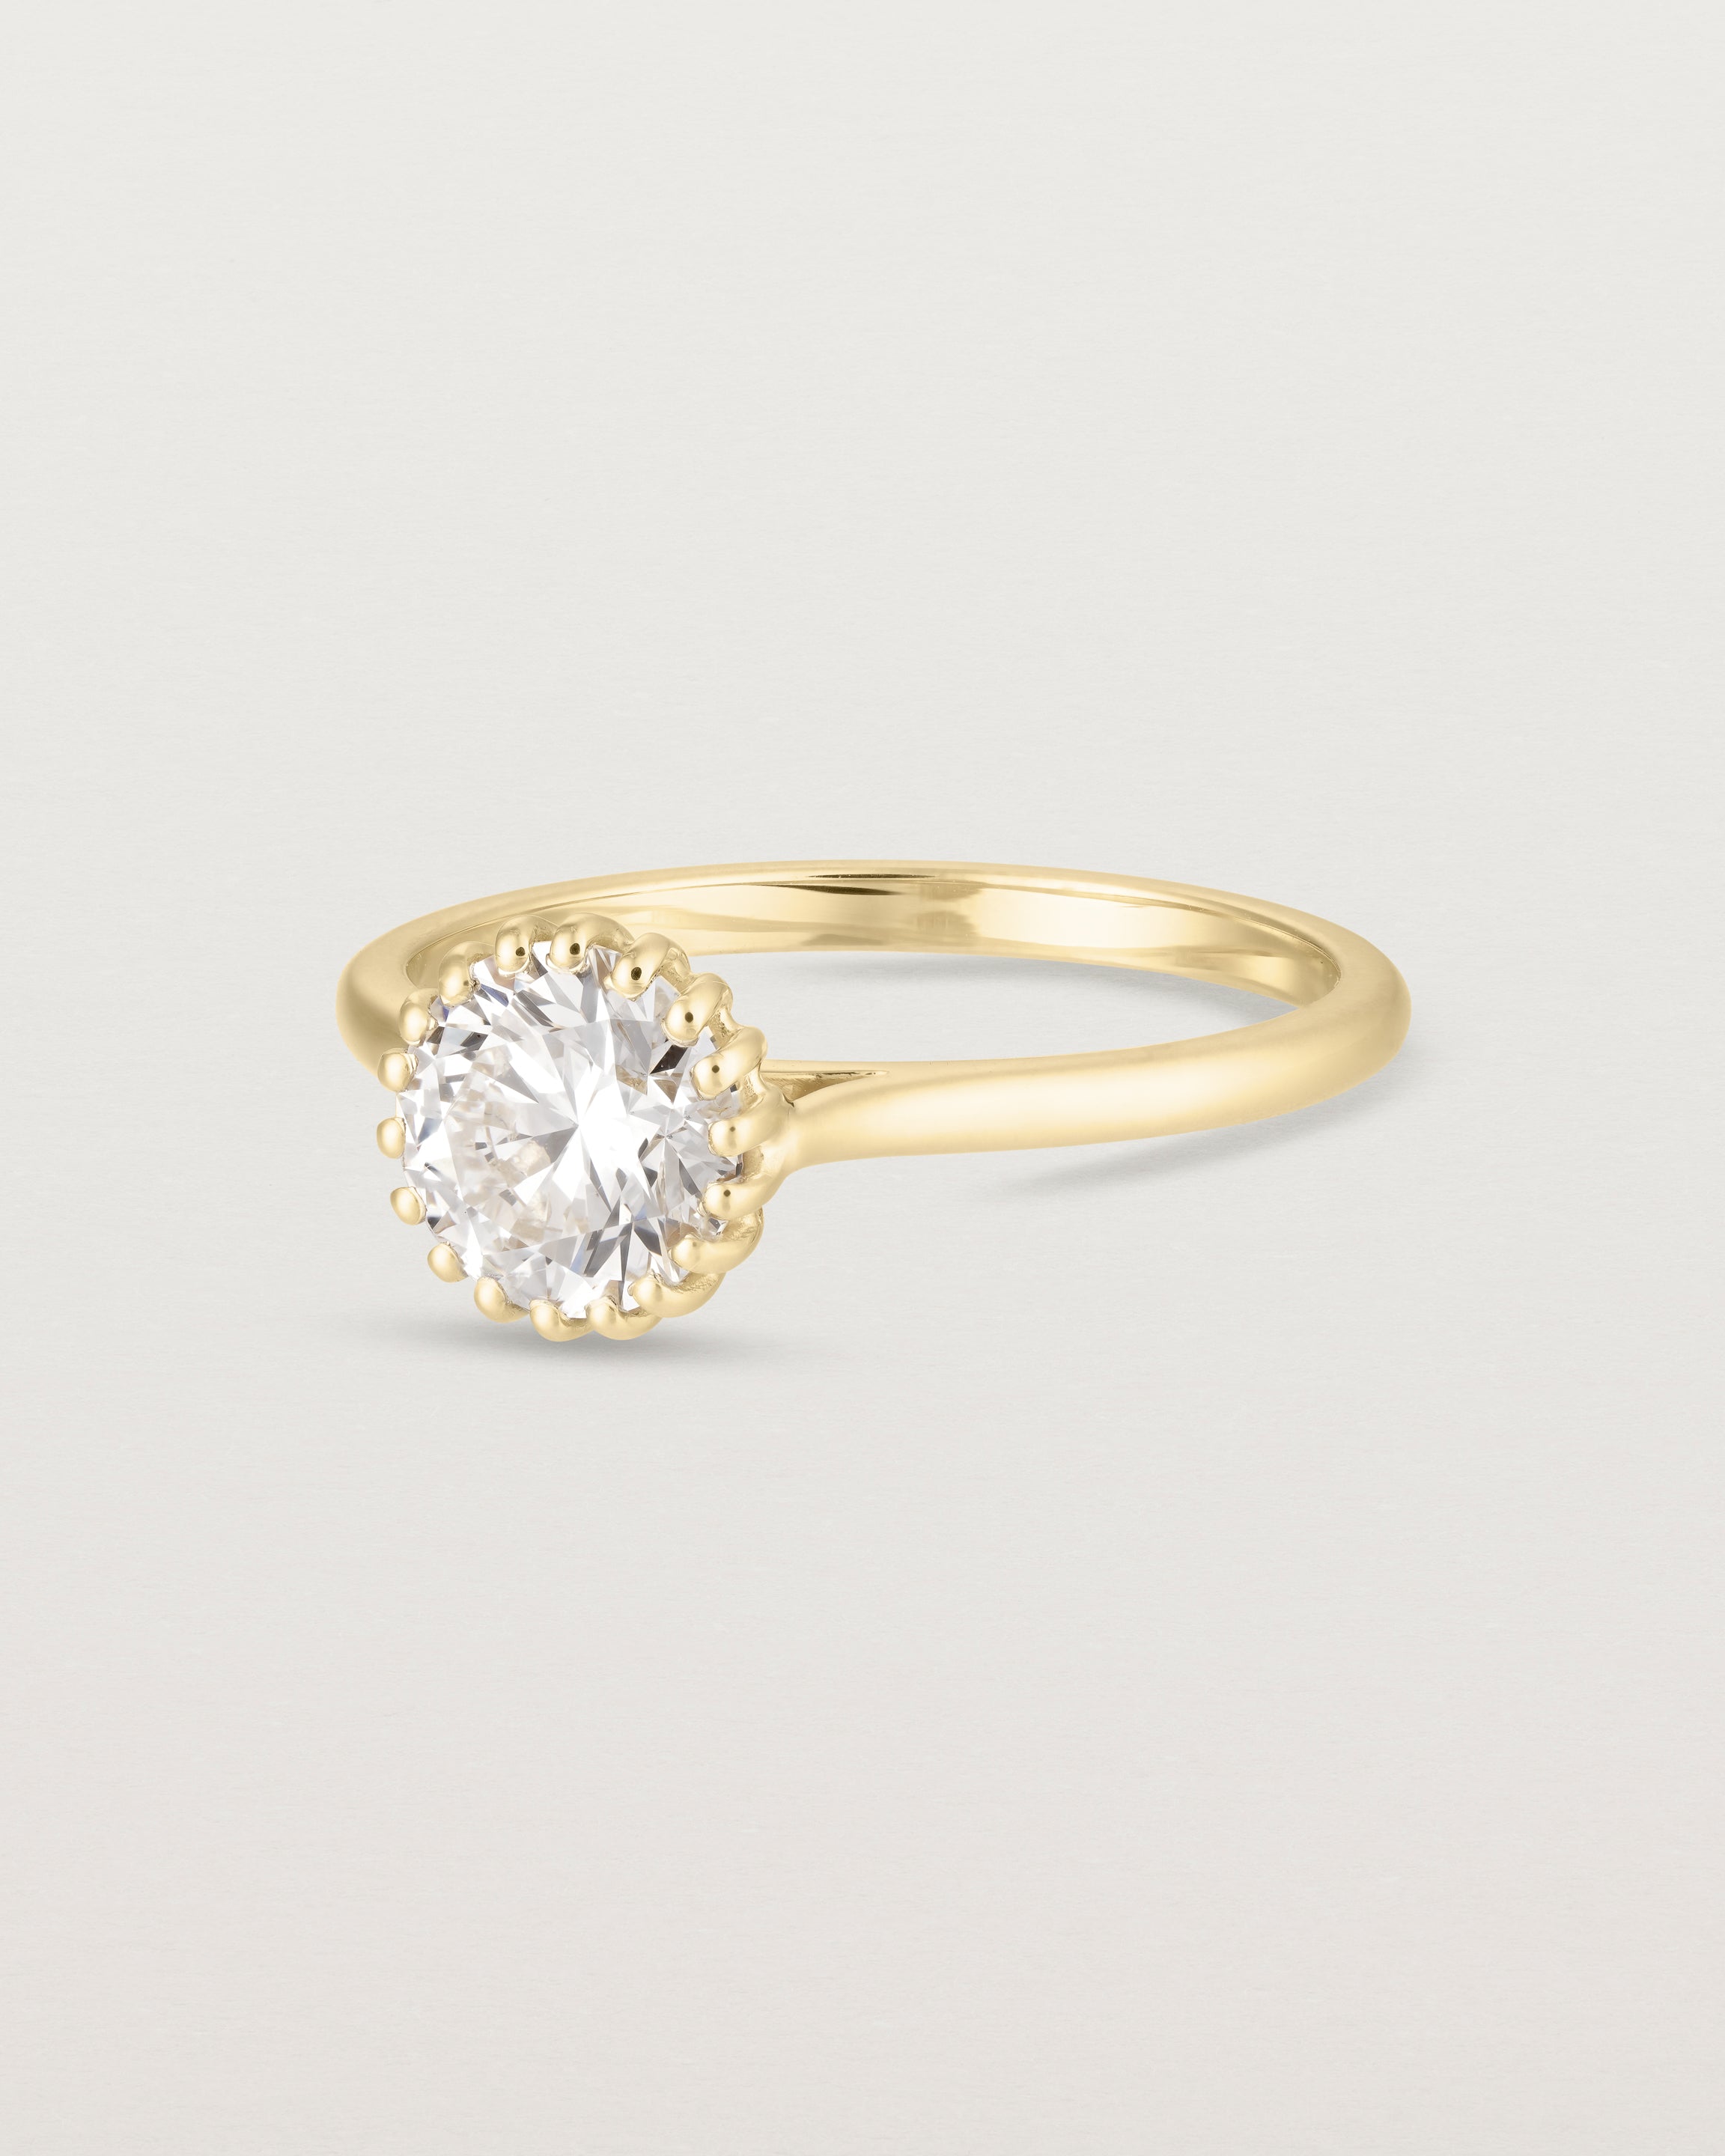 Angled view of the Meroë Round Solitaire | Laboratory Grown Diamond in yellow gold